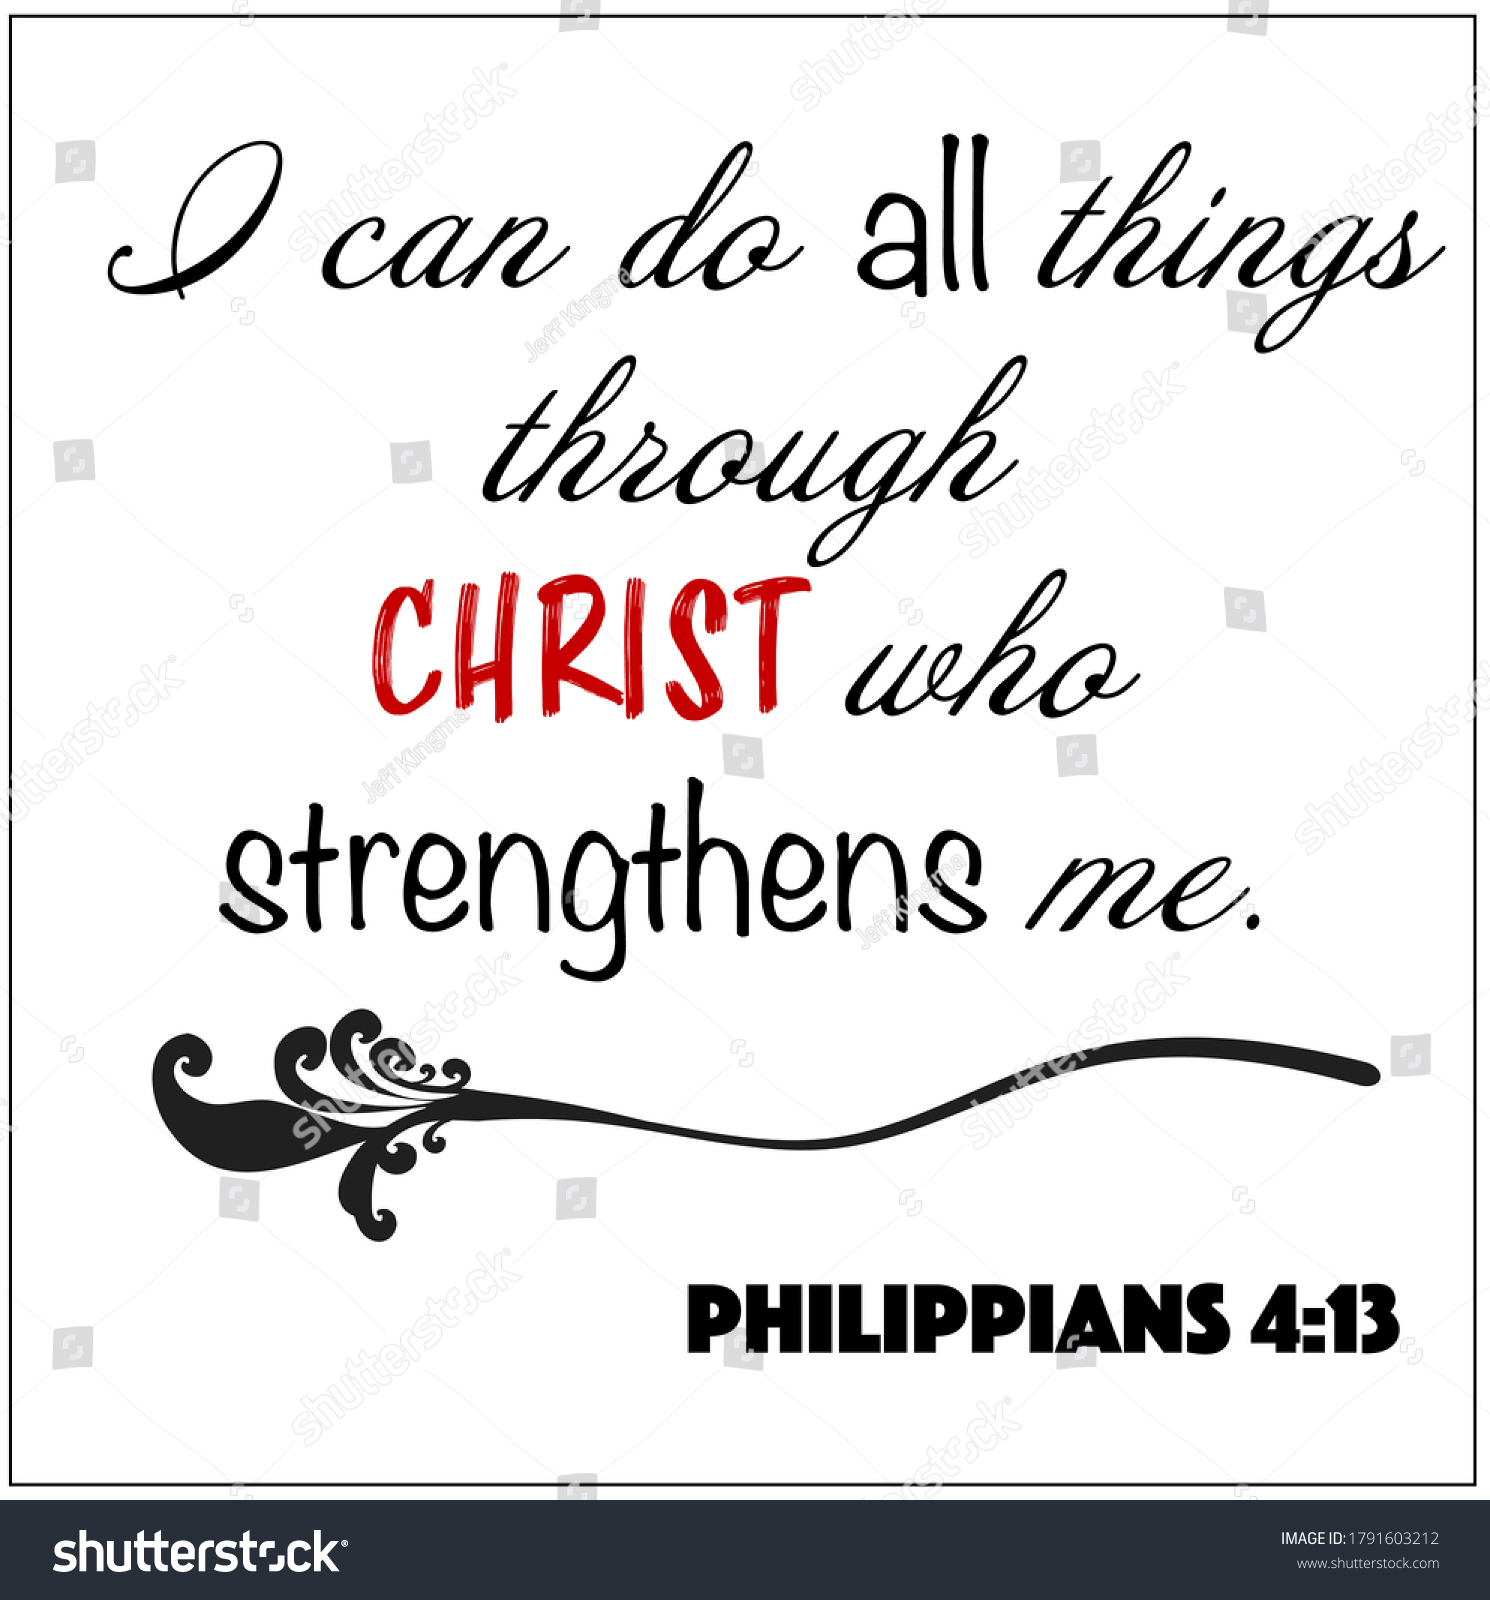 SVG of Philippians 4:13 - I can do all things through Christ who strengthens me design vector on white background for Christian encouragement from the New Testament Bible scriptures.	 svg